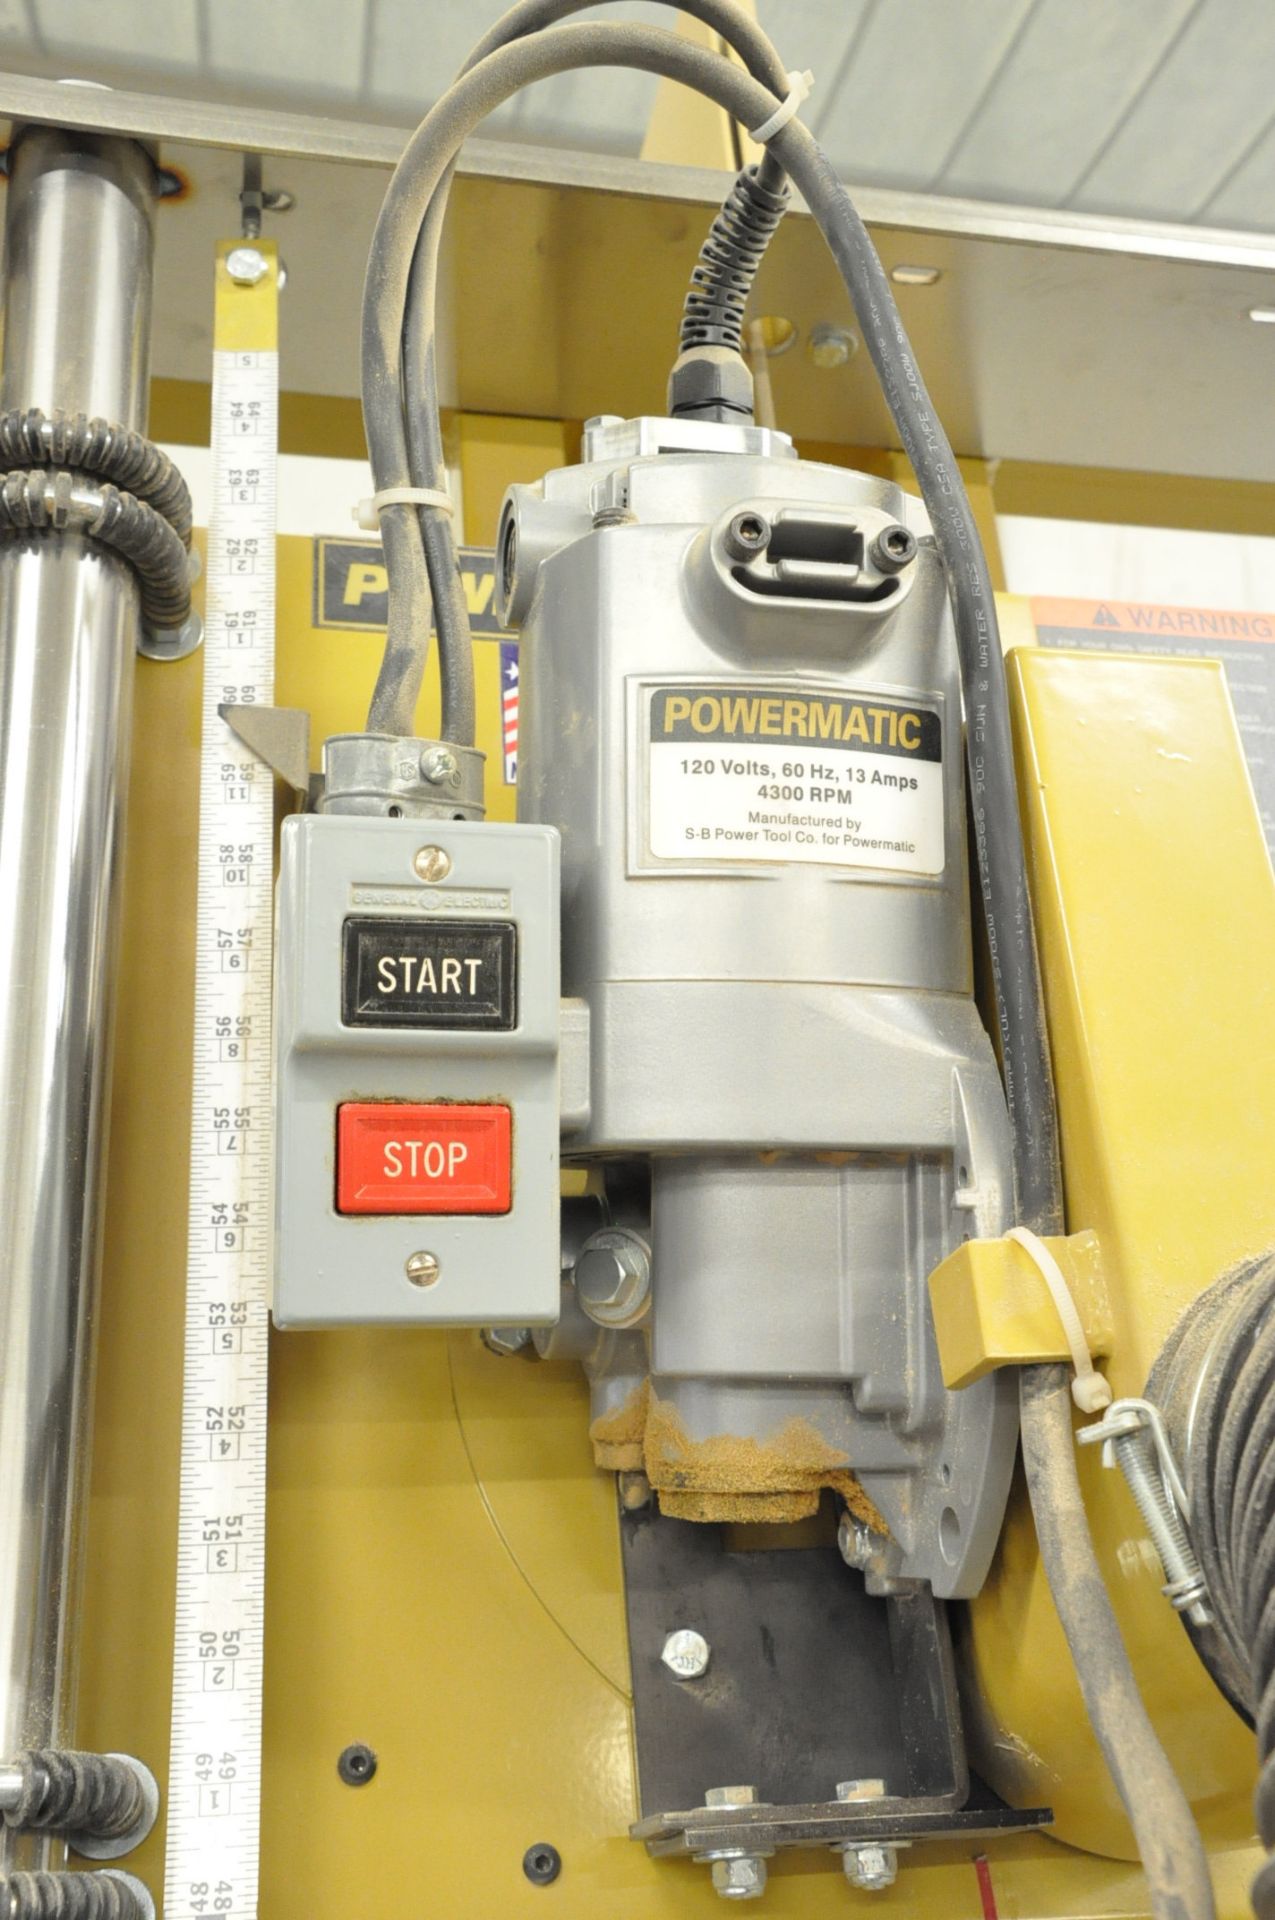 Powermatic Model 511, Vertical Panel Saw, S/n 0825201415, 3-HP, with Flex Hose Exhaust Connection - Image 3 of 4